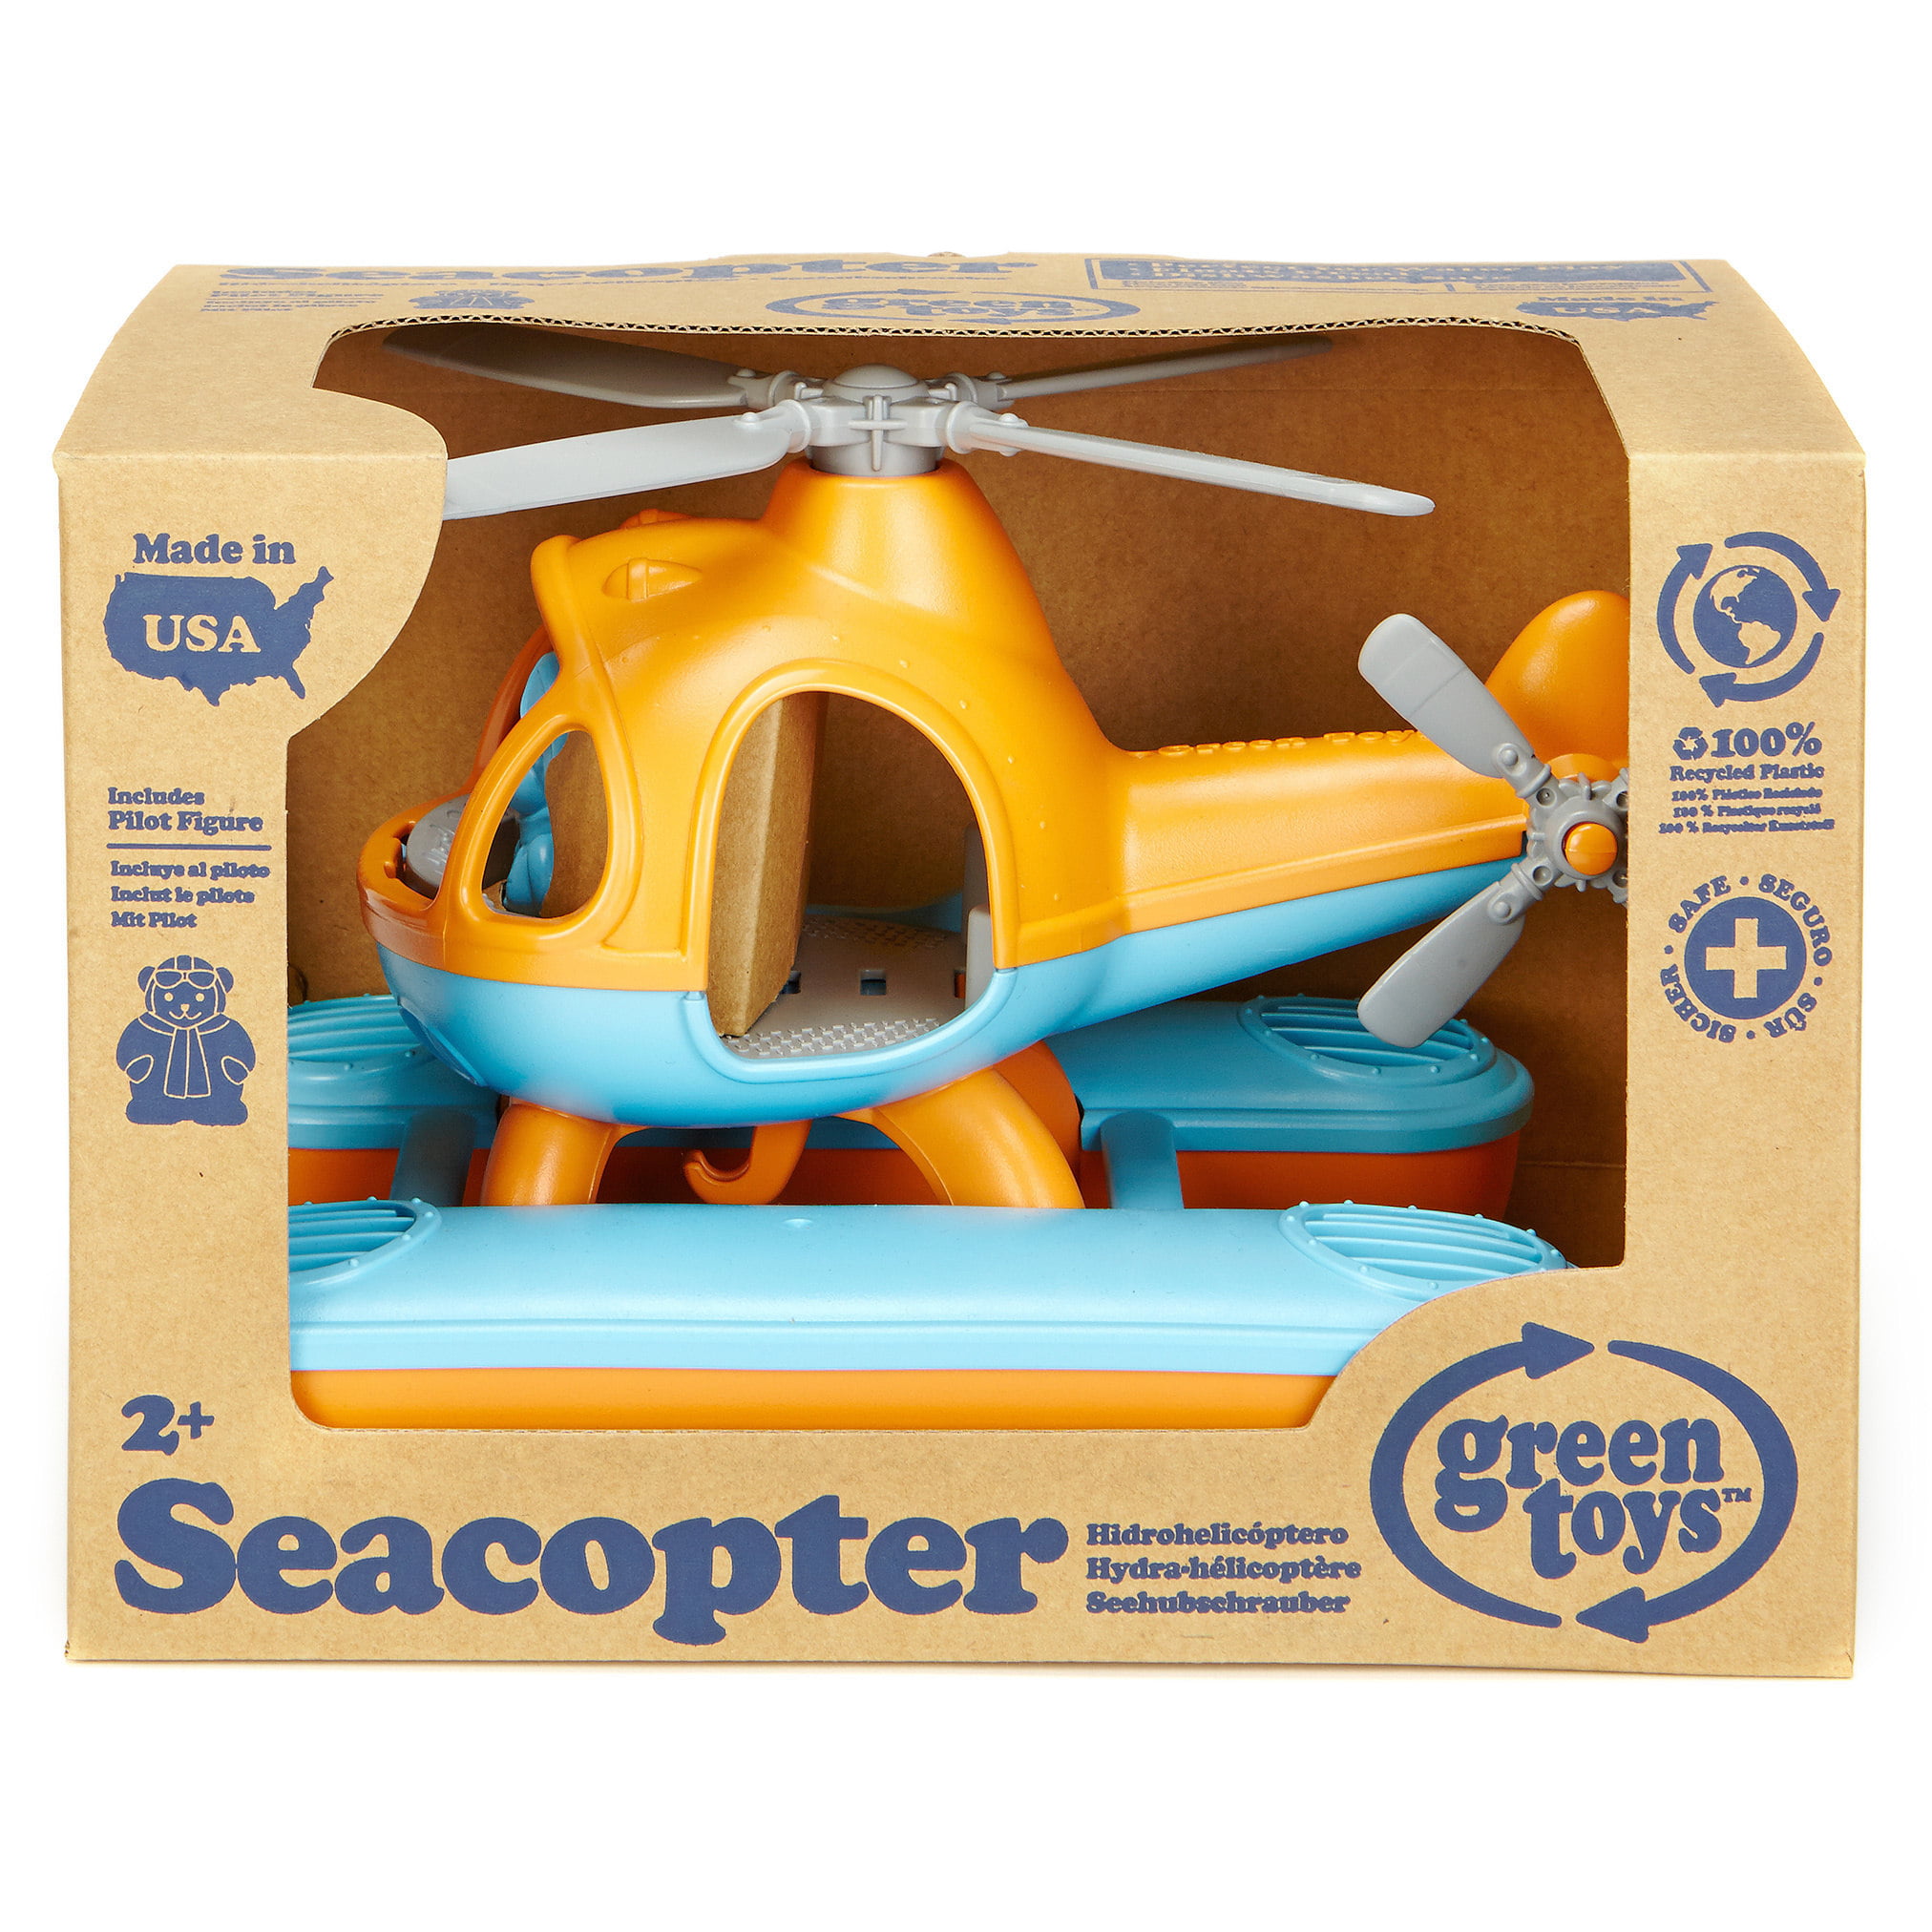 Green Toys Seacopter Play Vehicles, Orange/Blue, for Unisex Child Ages 2+